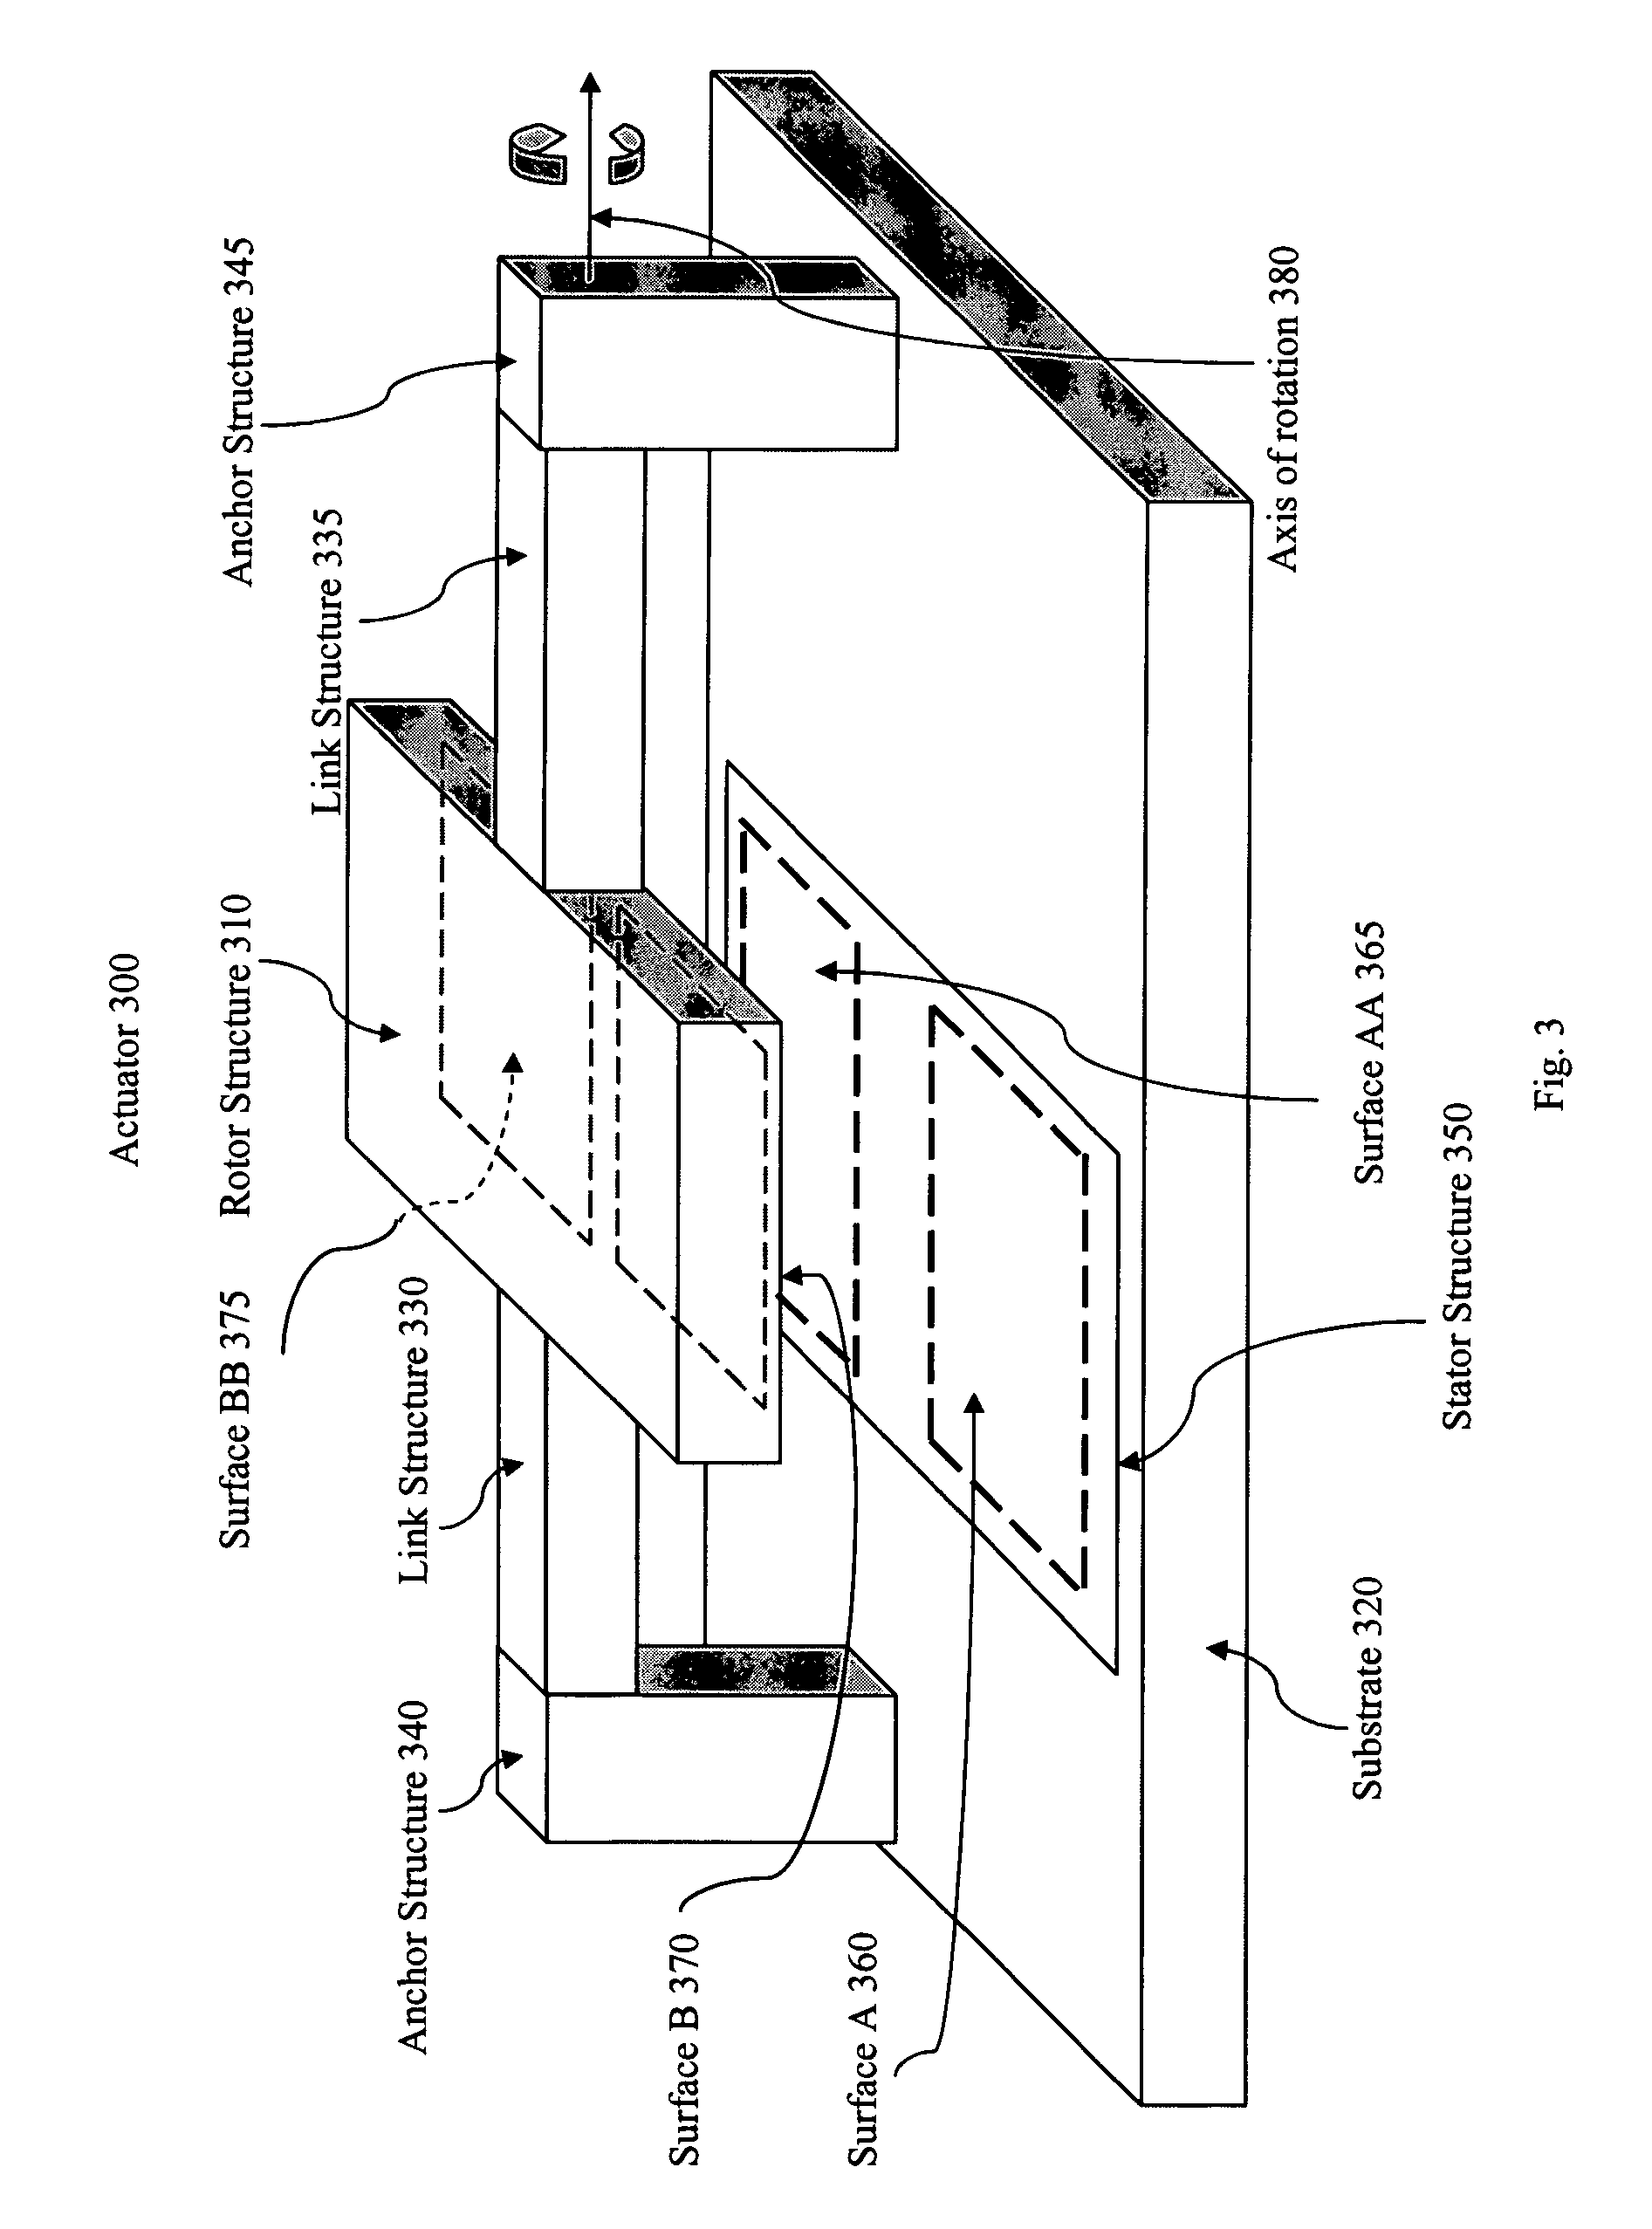 Micro electro mechanical system using comb and parallel plate actuation